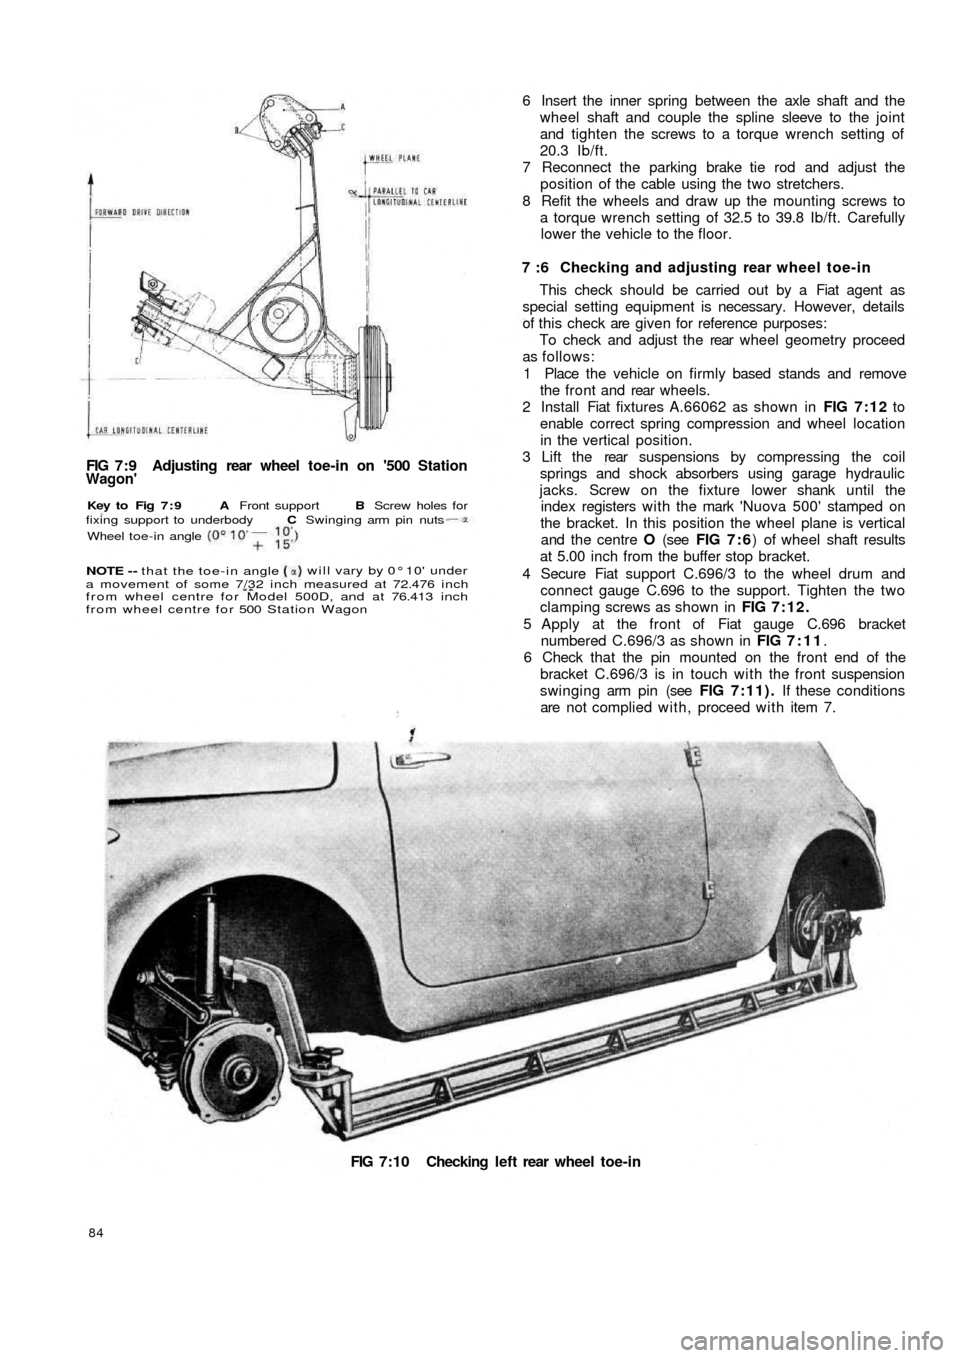 FIAT 500 1969 1.G Workshop Manual FIG 7:9  Adjusting  rear  wheel toe-in on 500 StationWagon
FIG 7:10 Checking left rear wheel toe-in
84
6 Insert the inner spring between the axle shaft and the
wheel shaft and couple the spline slee